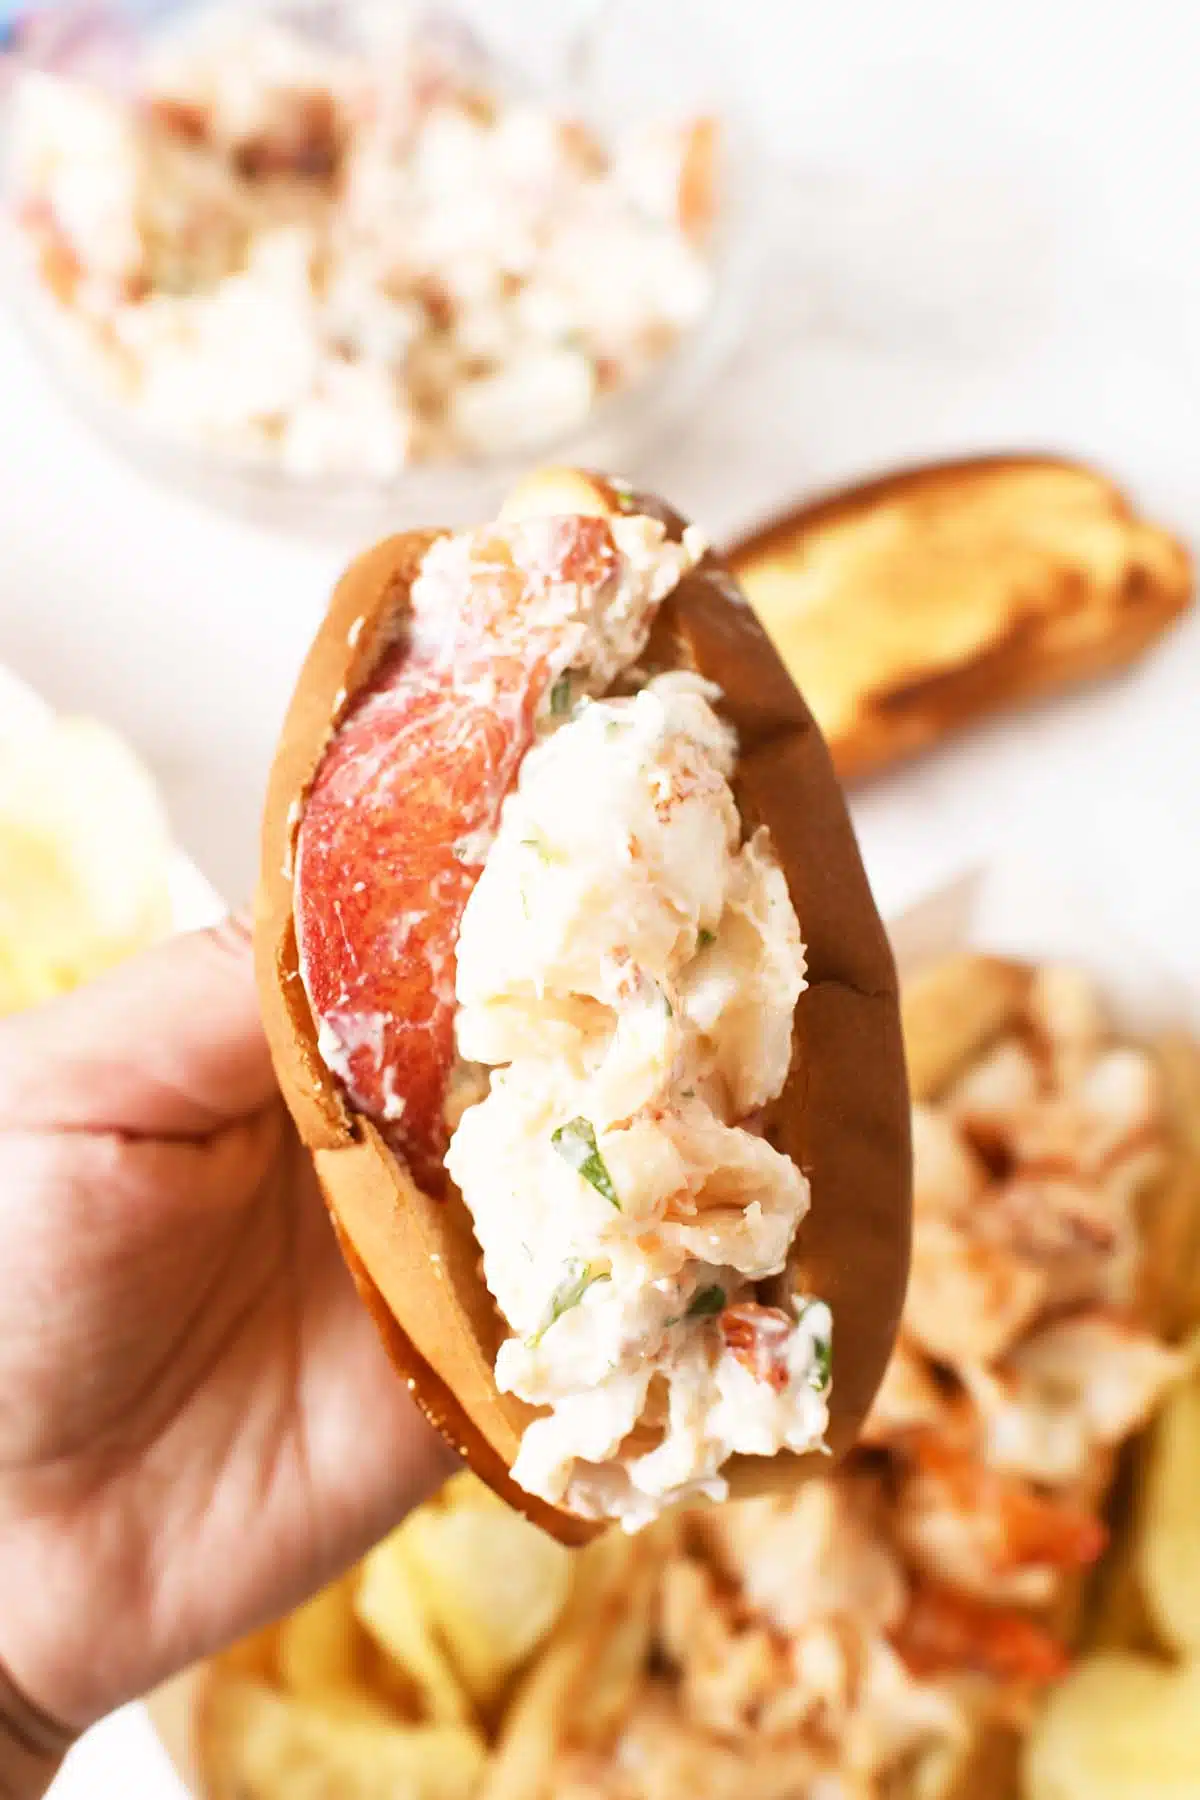 Lobster salad stuffed in a toasted min hot dog bun in a hand.